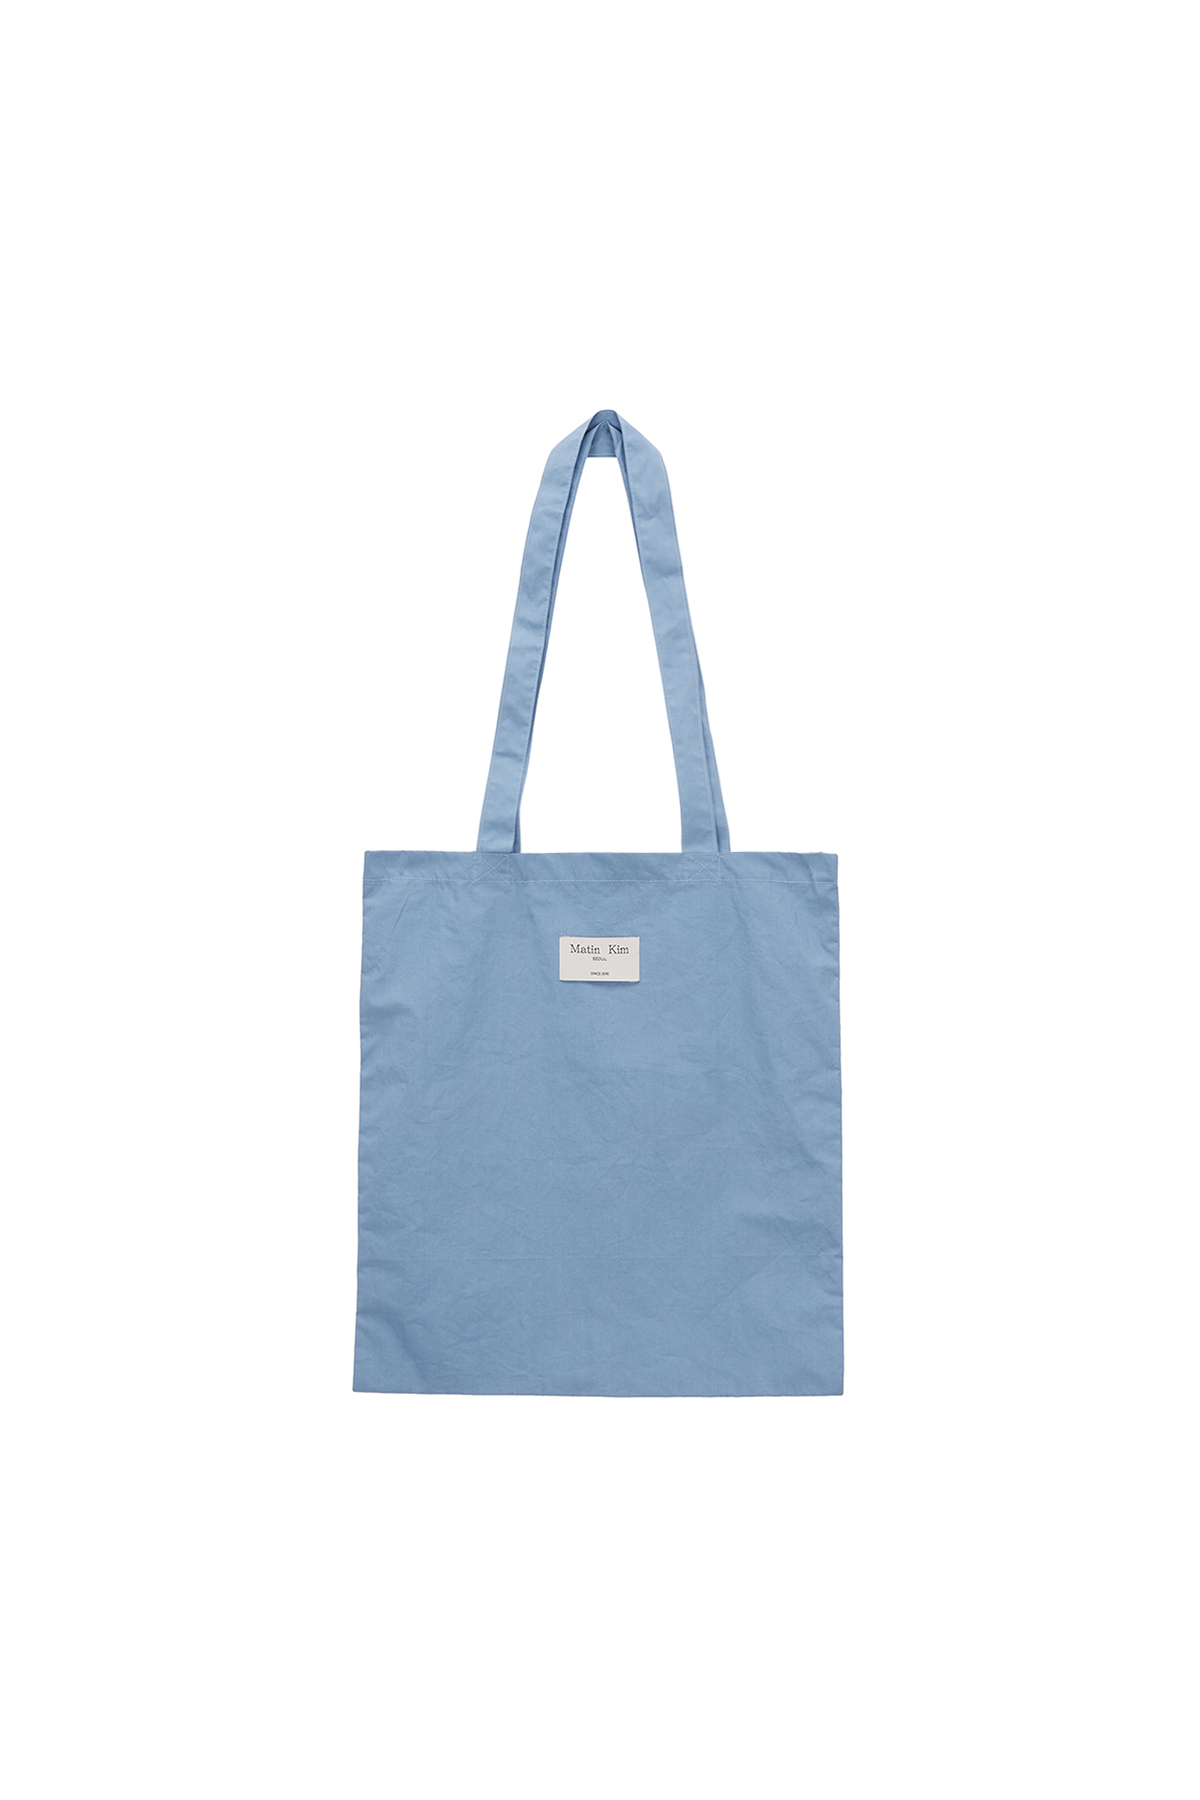 MATIN POPPIN ECOBAG IN BLUE